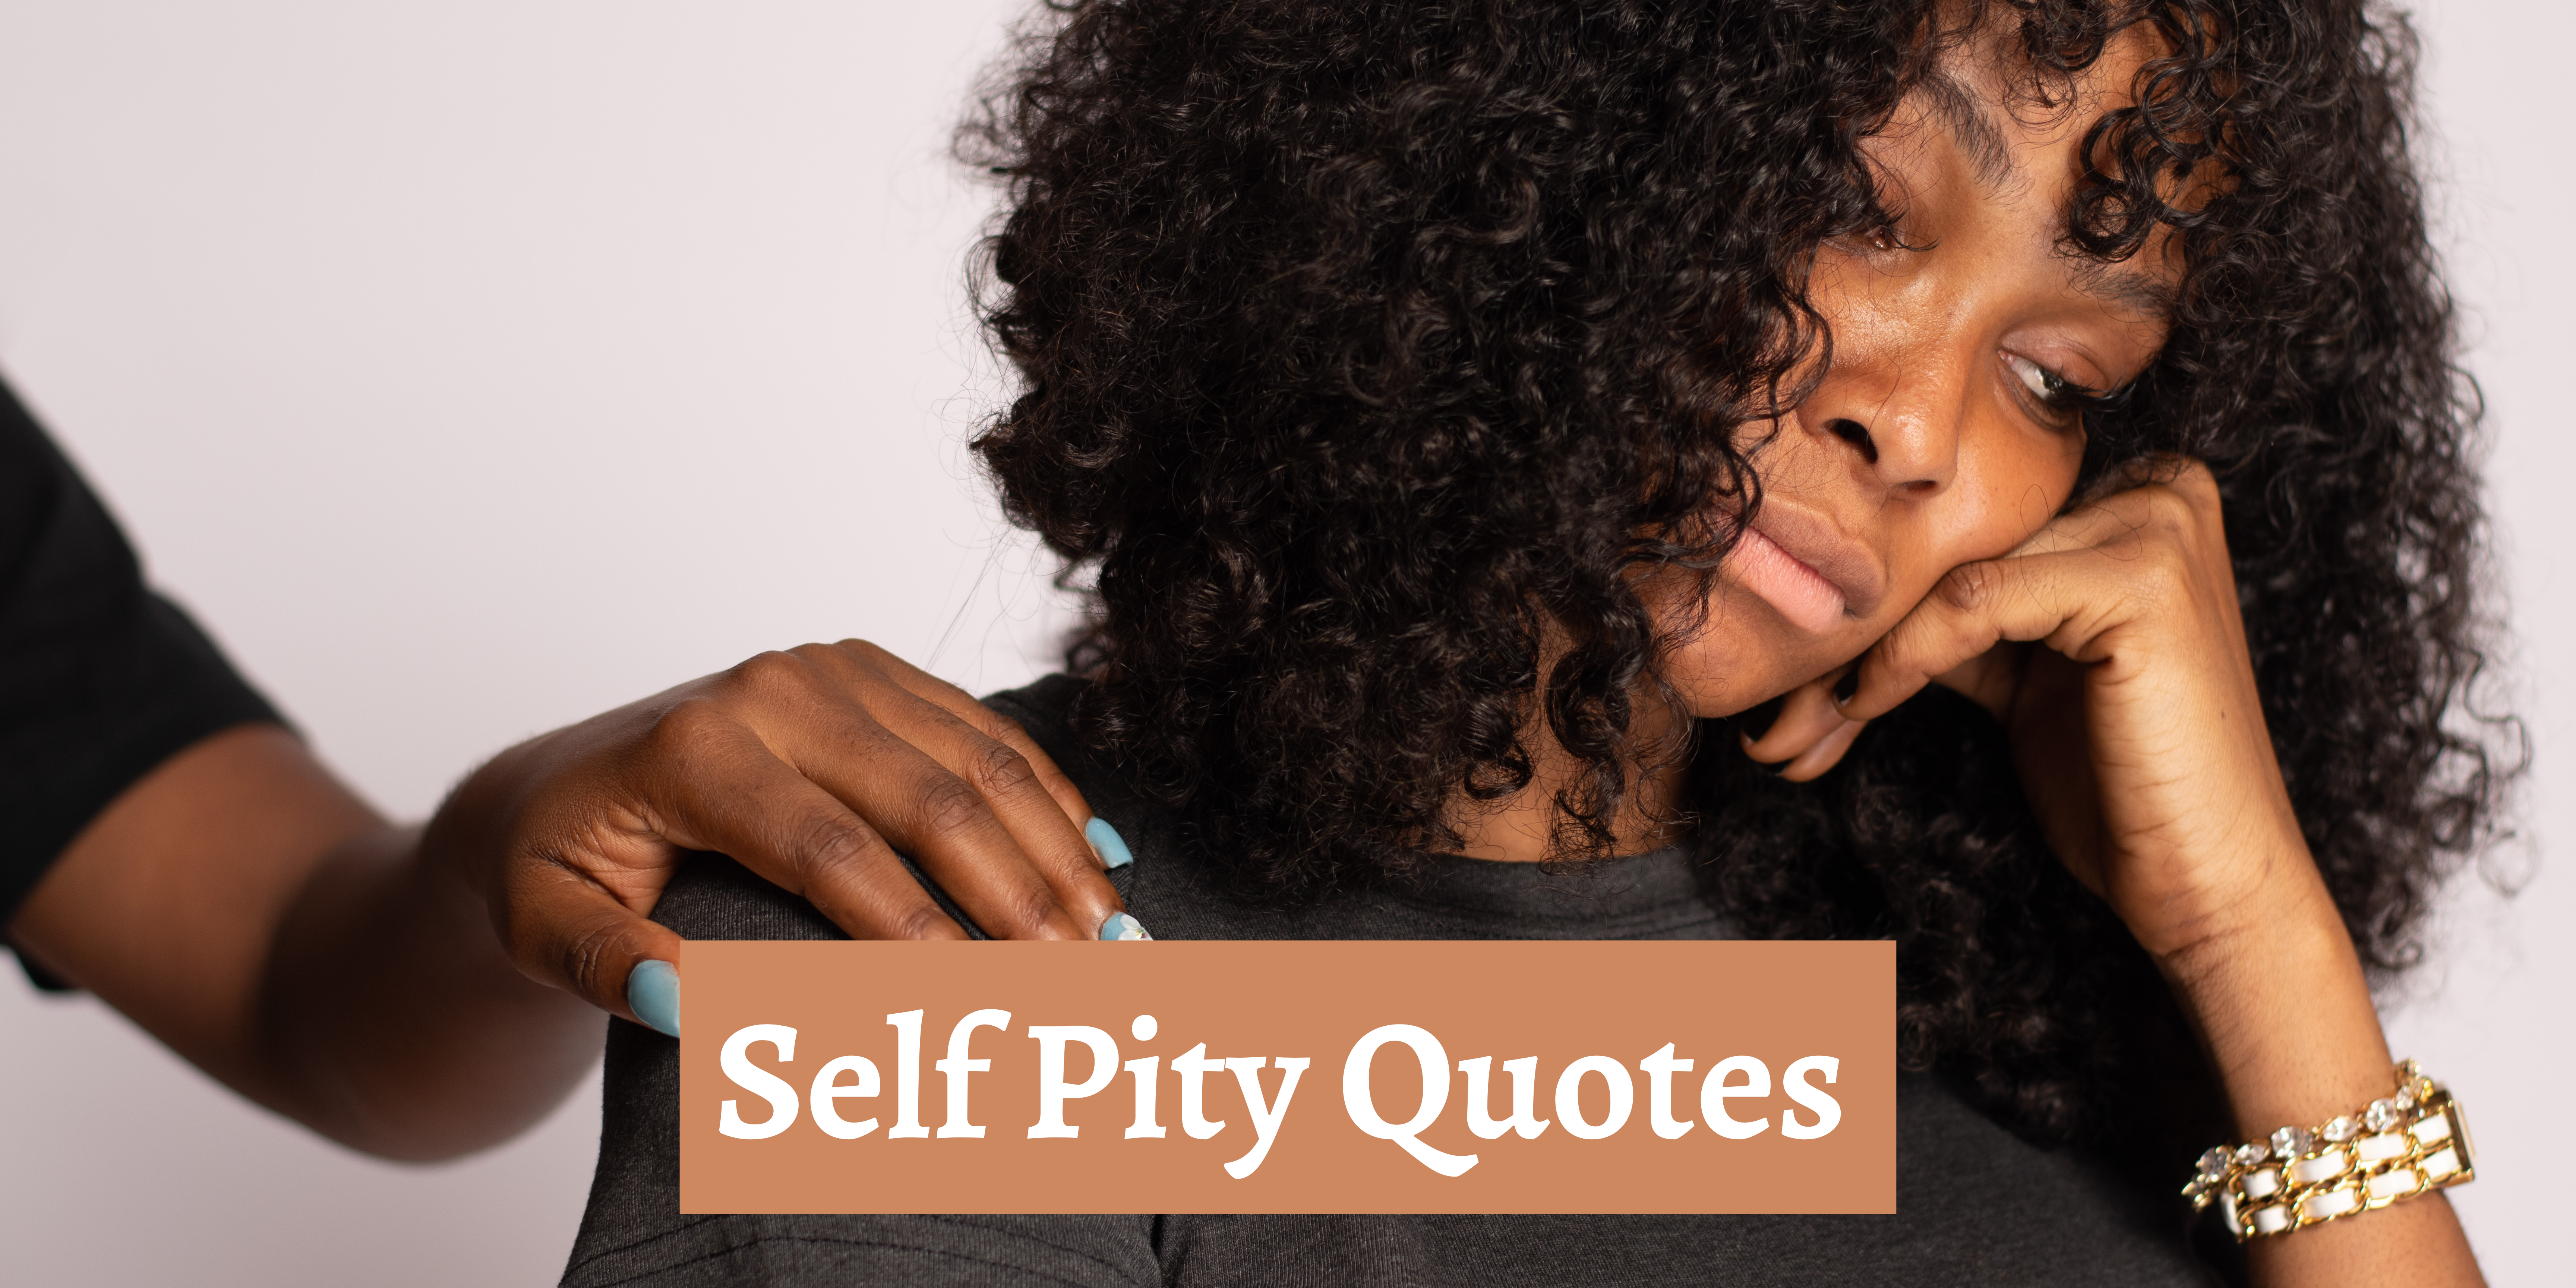 Self Pity Quotes